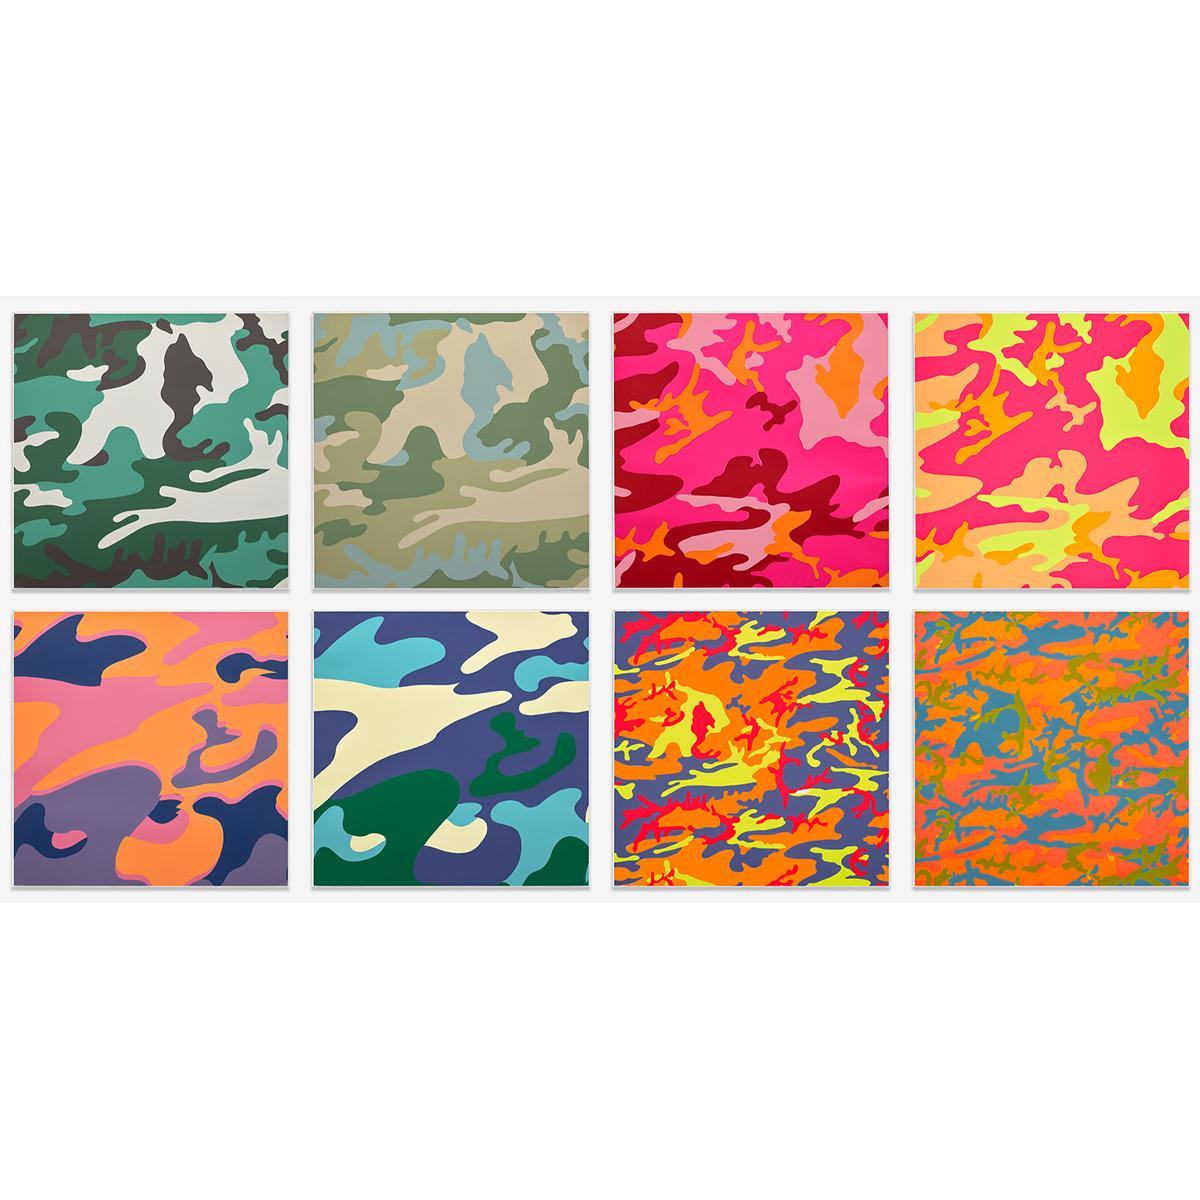 Andy Warhol Abstract Print - Camouflage, Complete Portfolio (FS II.406-FS II.413)